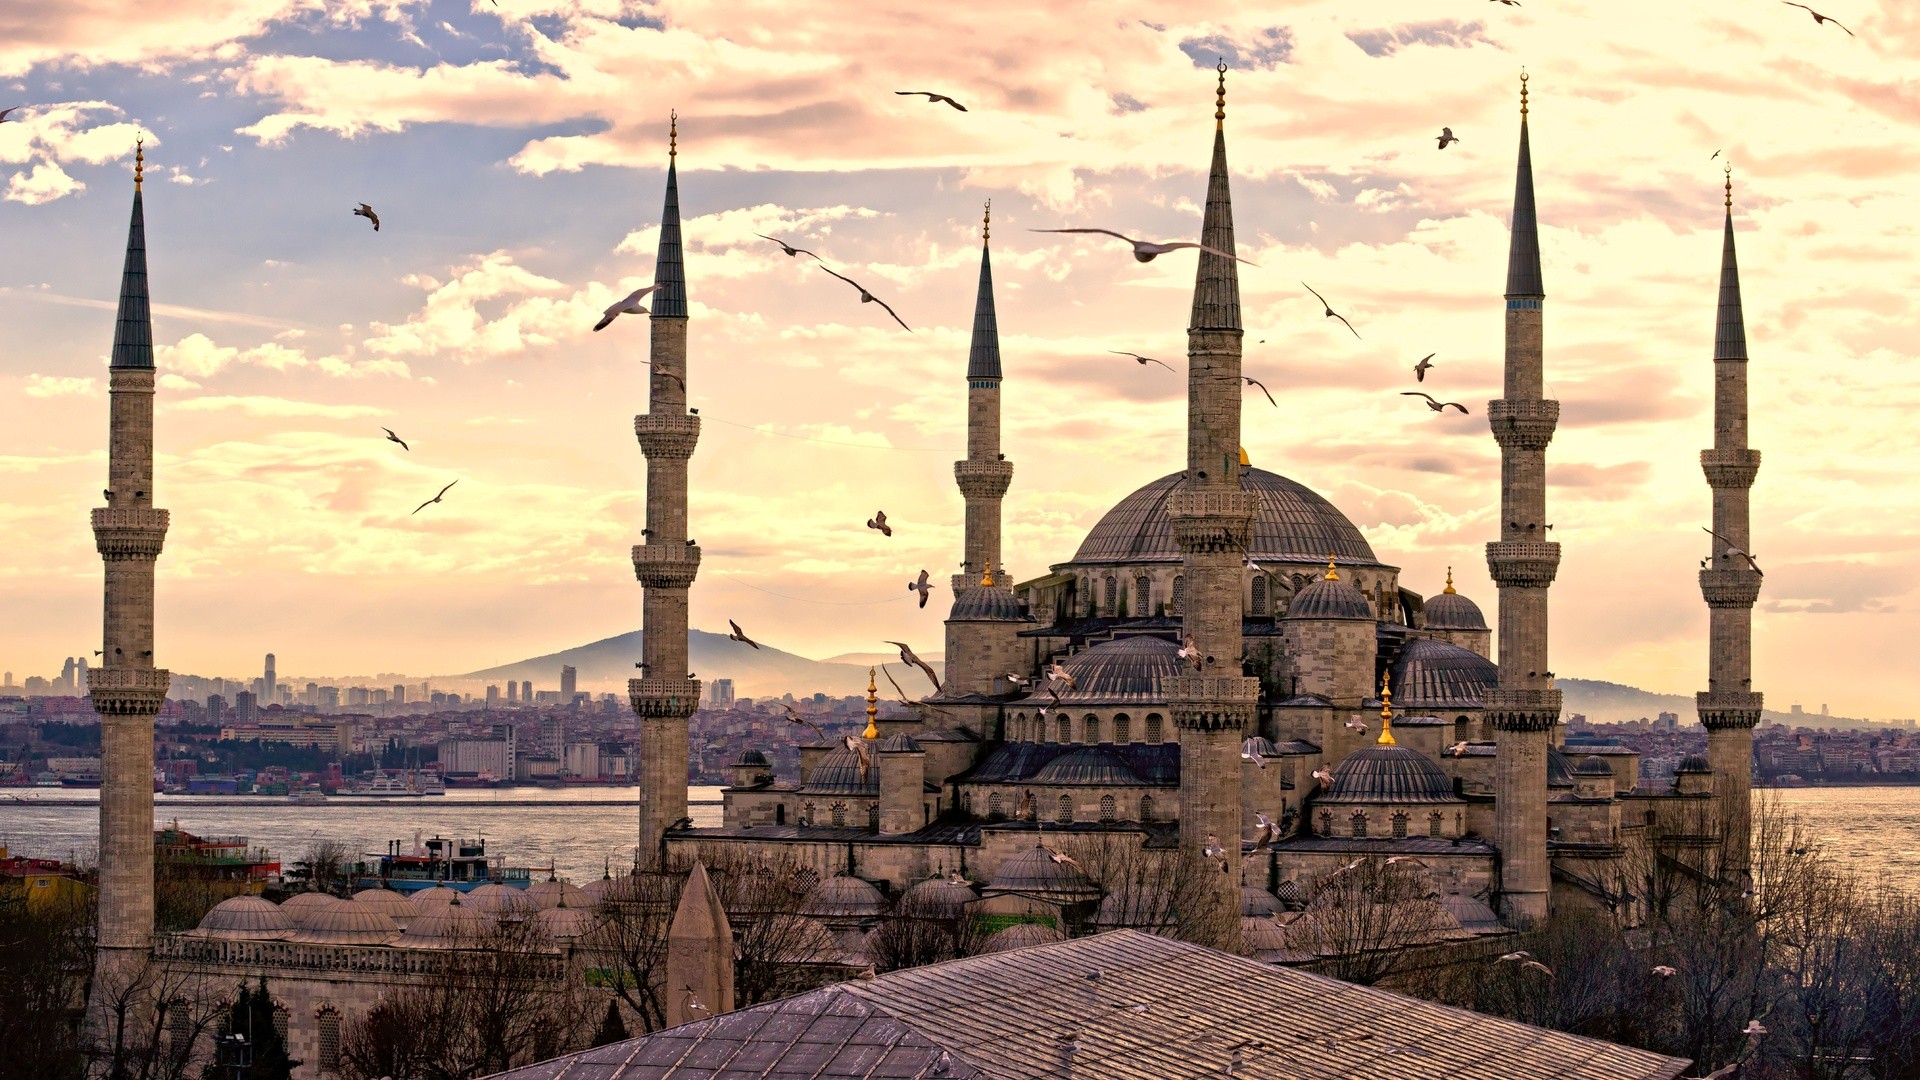 Mobile wallpaper religious, sultan ahmed mosque, mosques